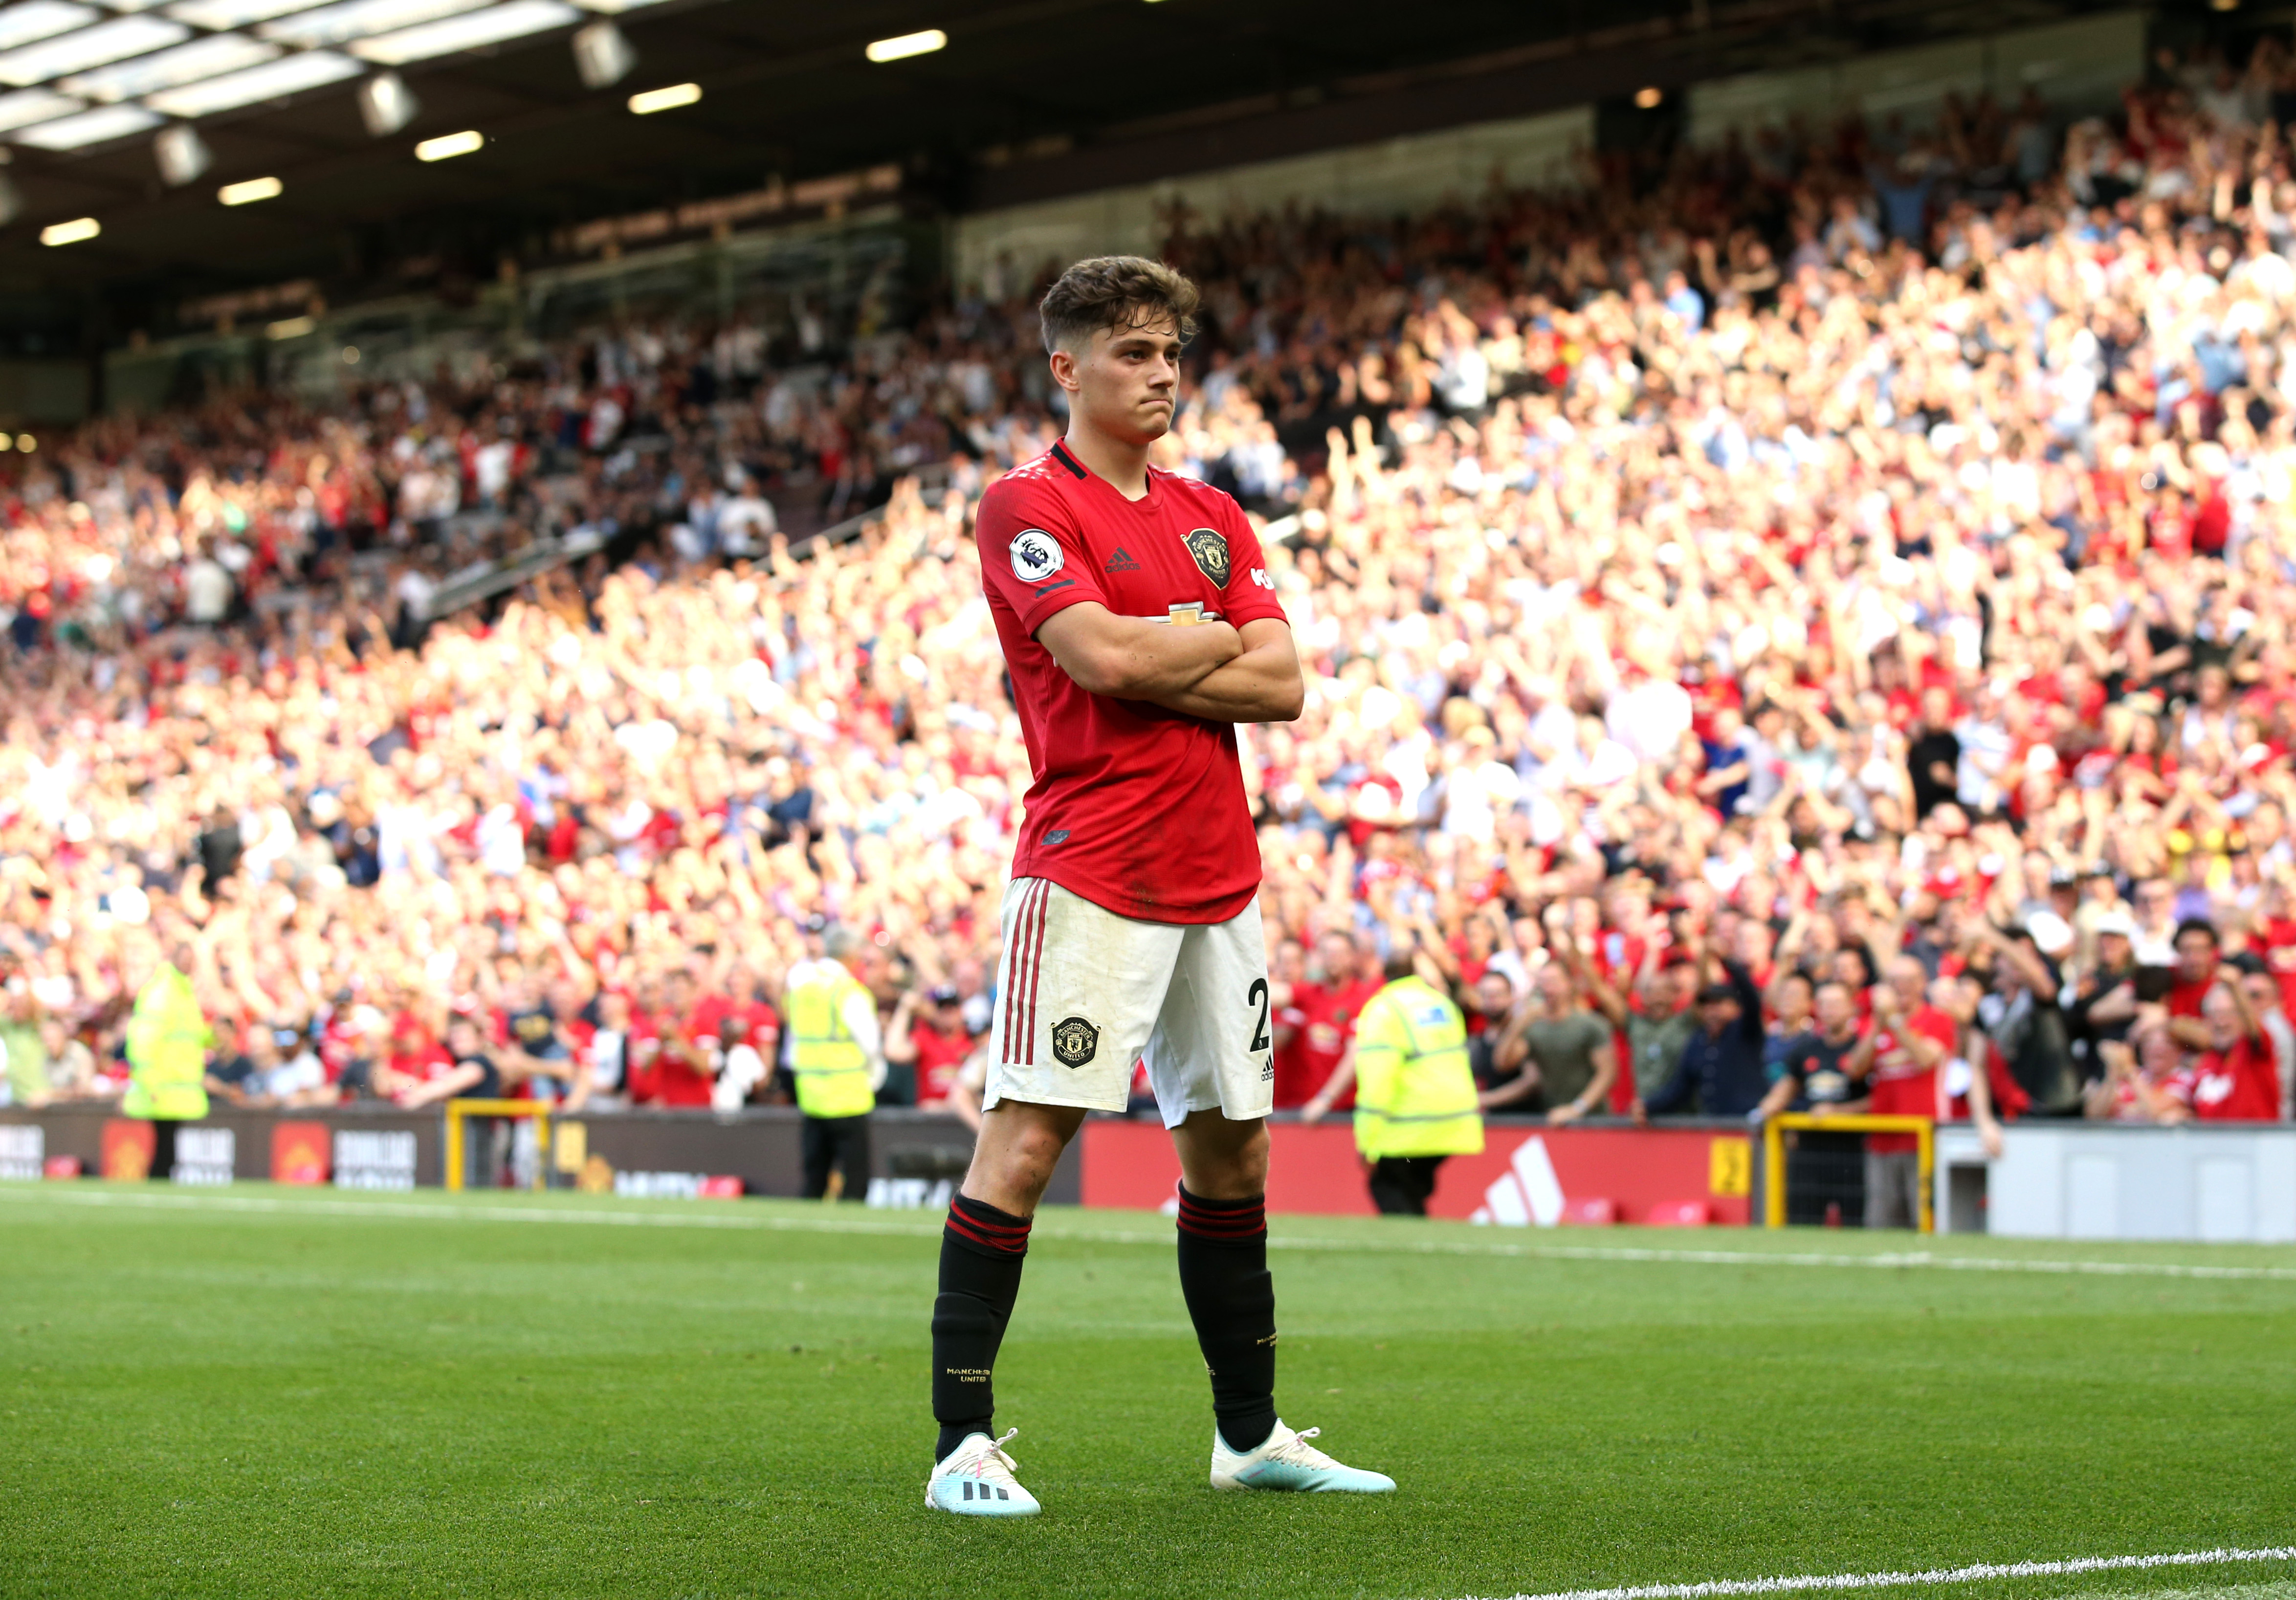 James made a blistering start to life at Manchester United. (Photo by Jan Kruger/Getty Images)